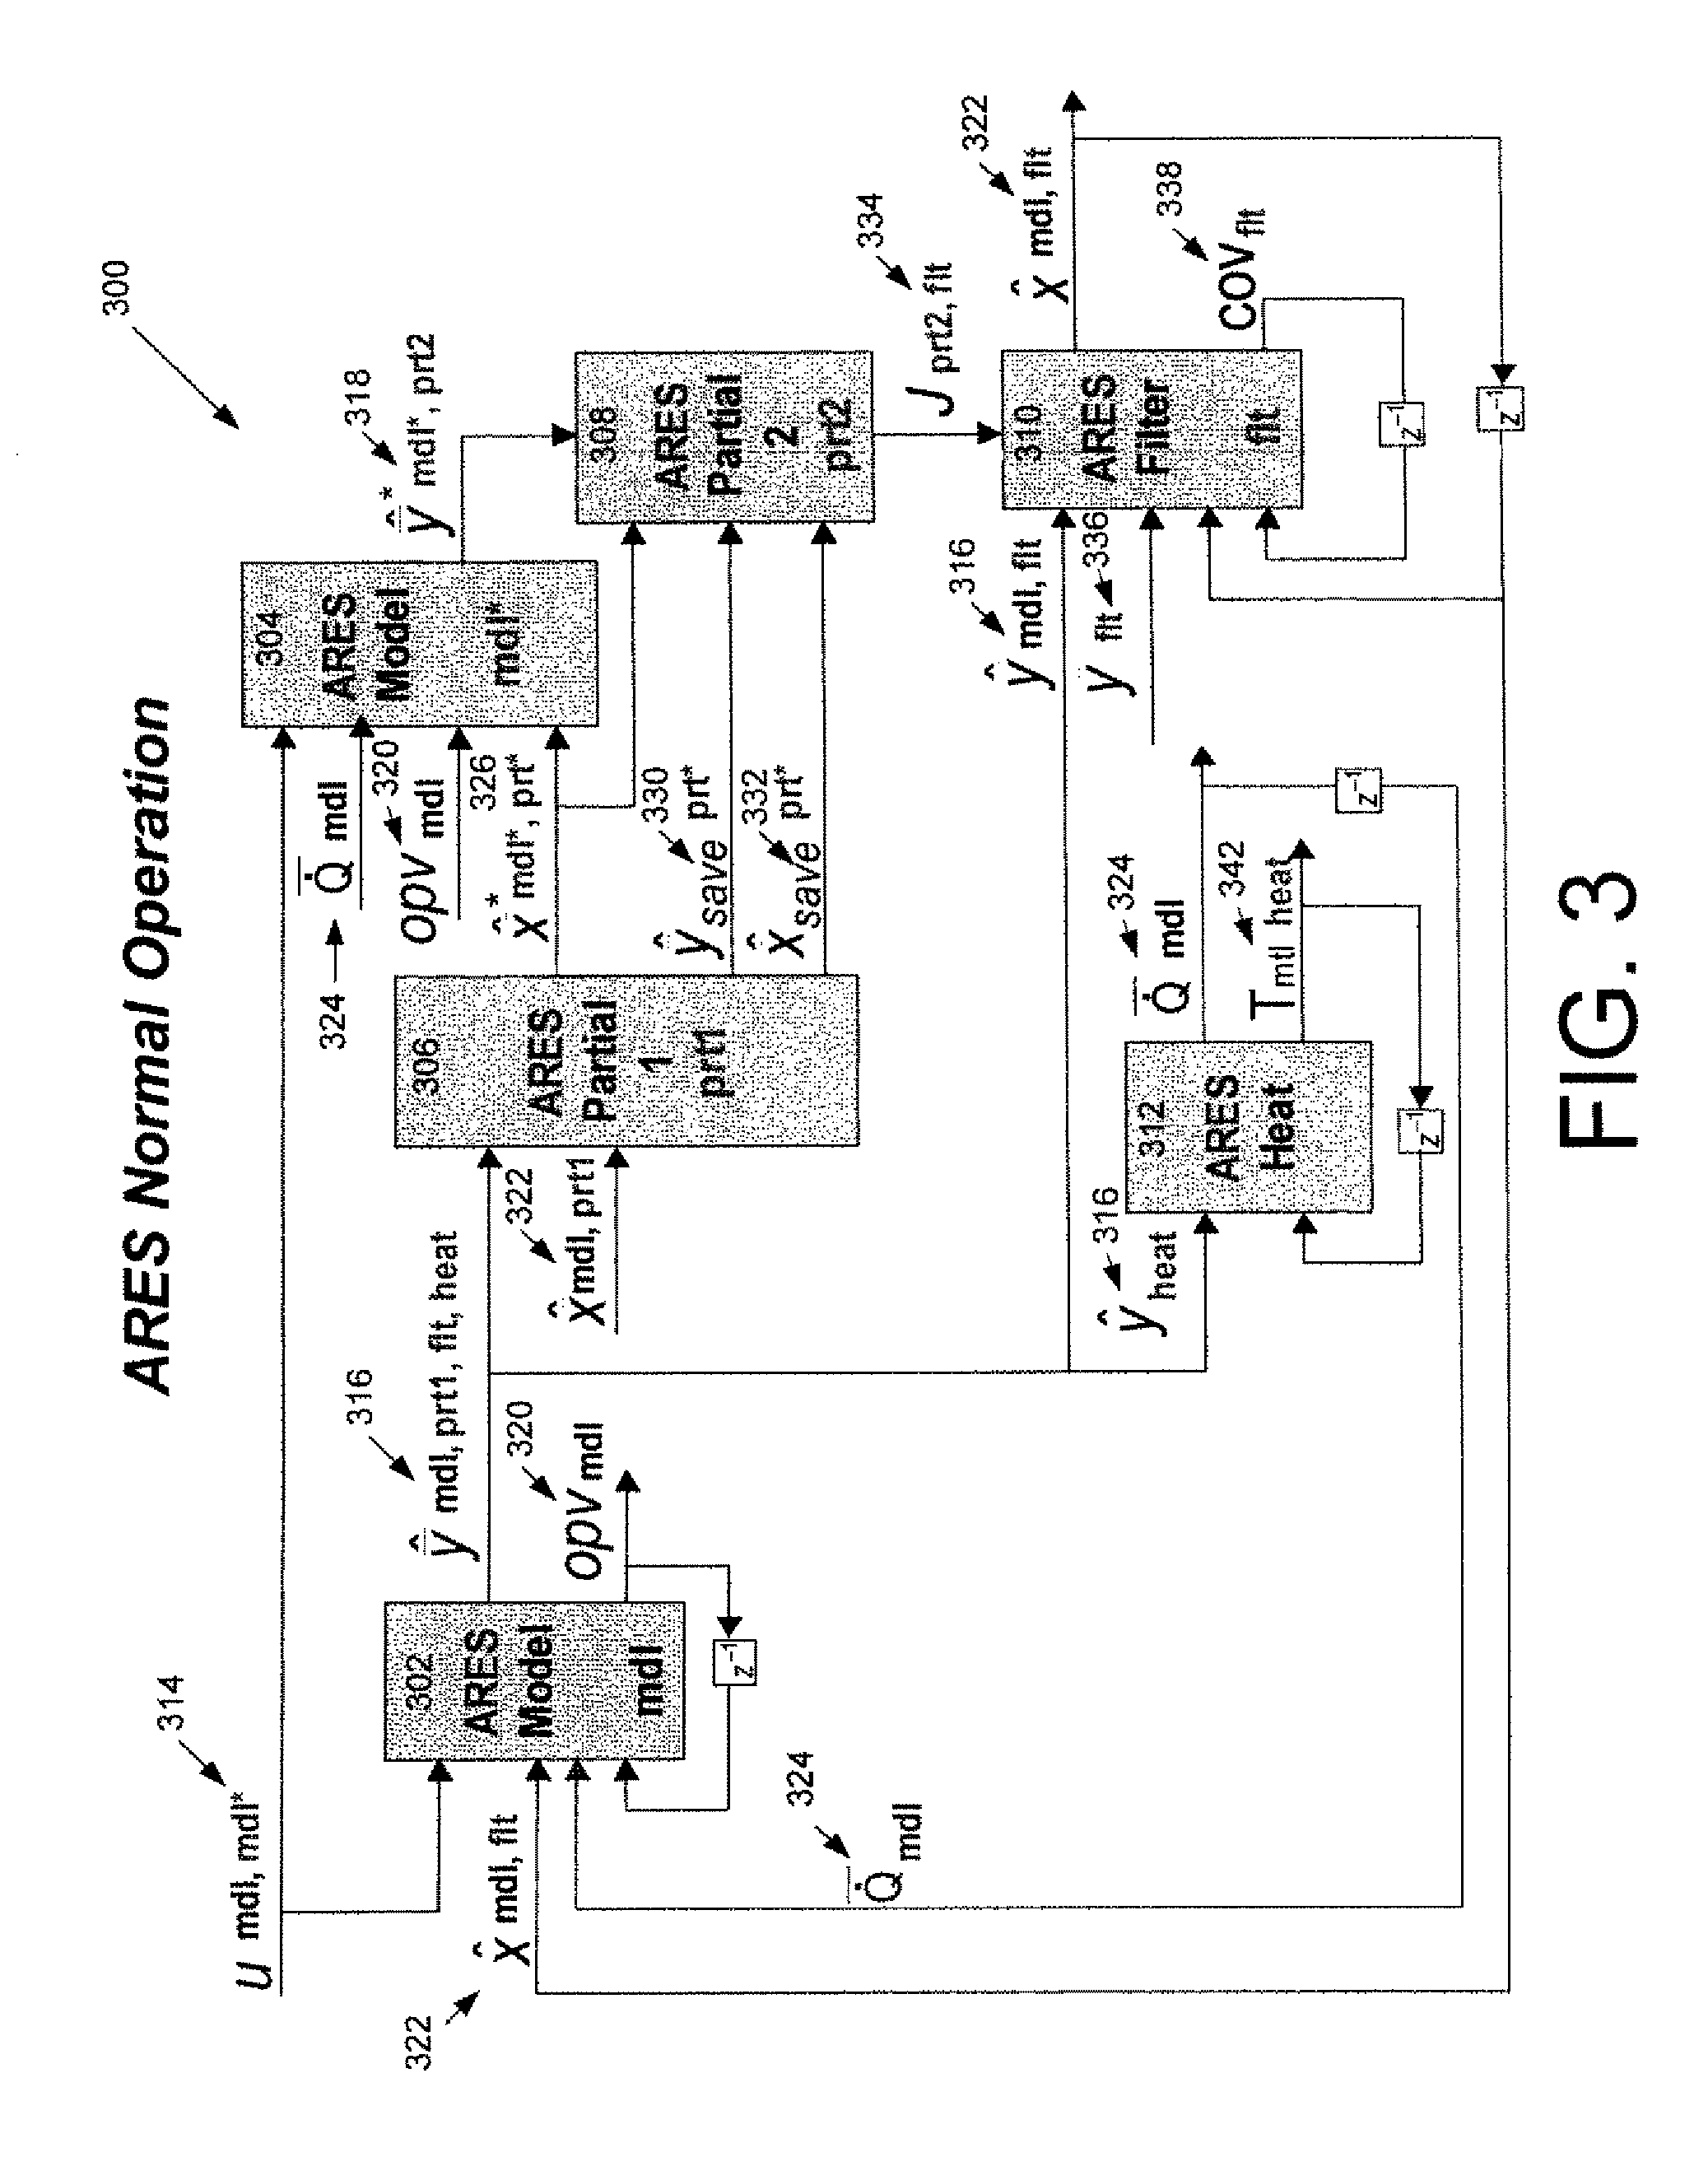 Systems and methods for initializing dynamic model states using a Kalman filter